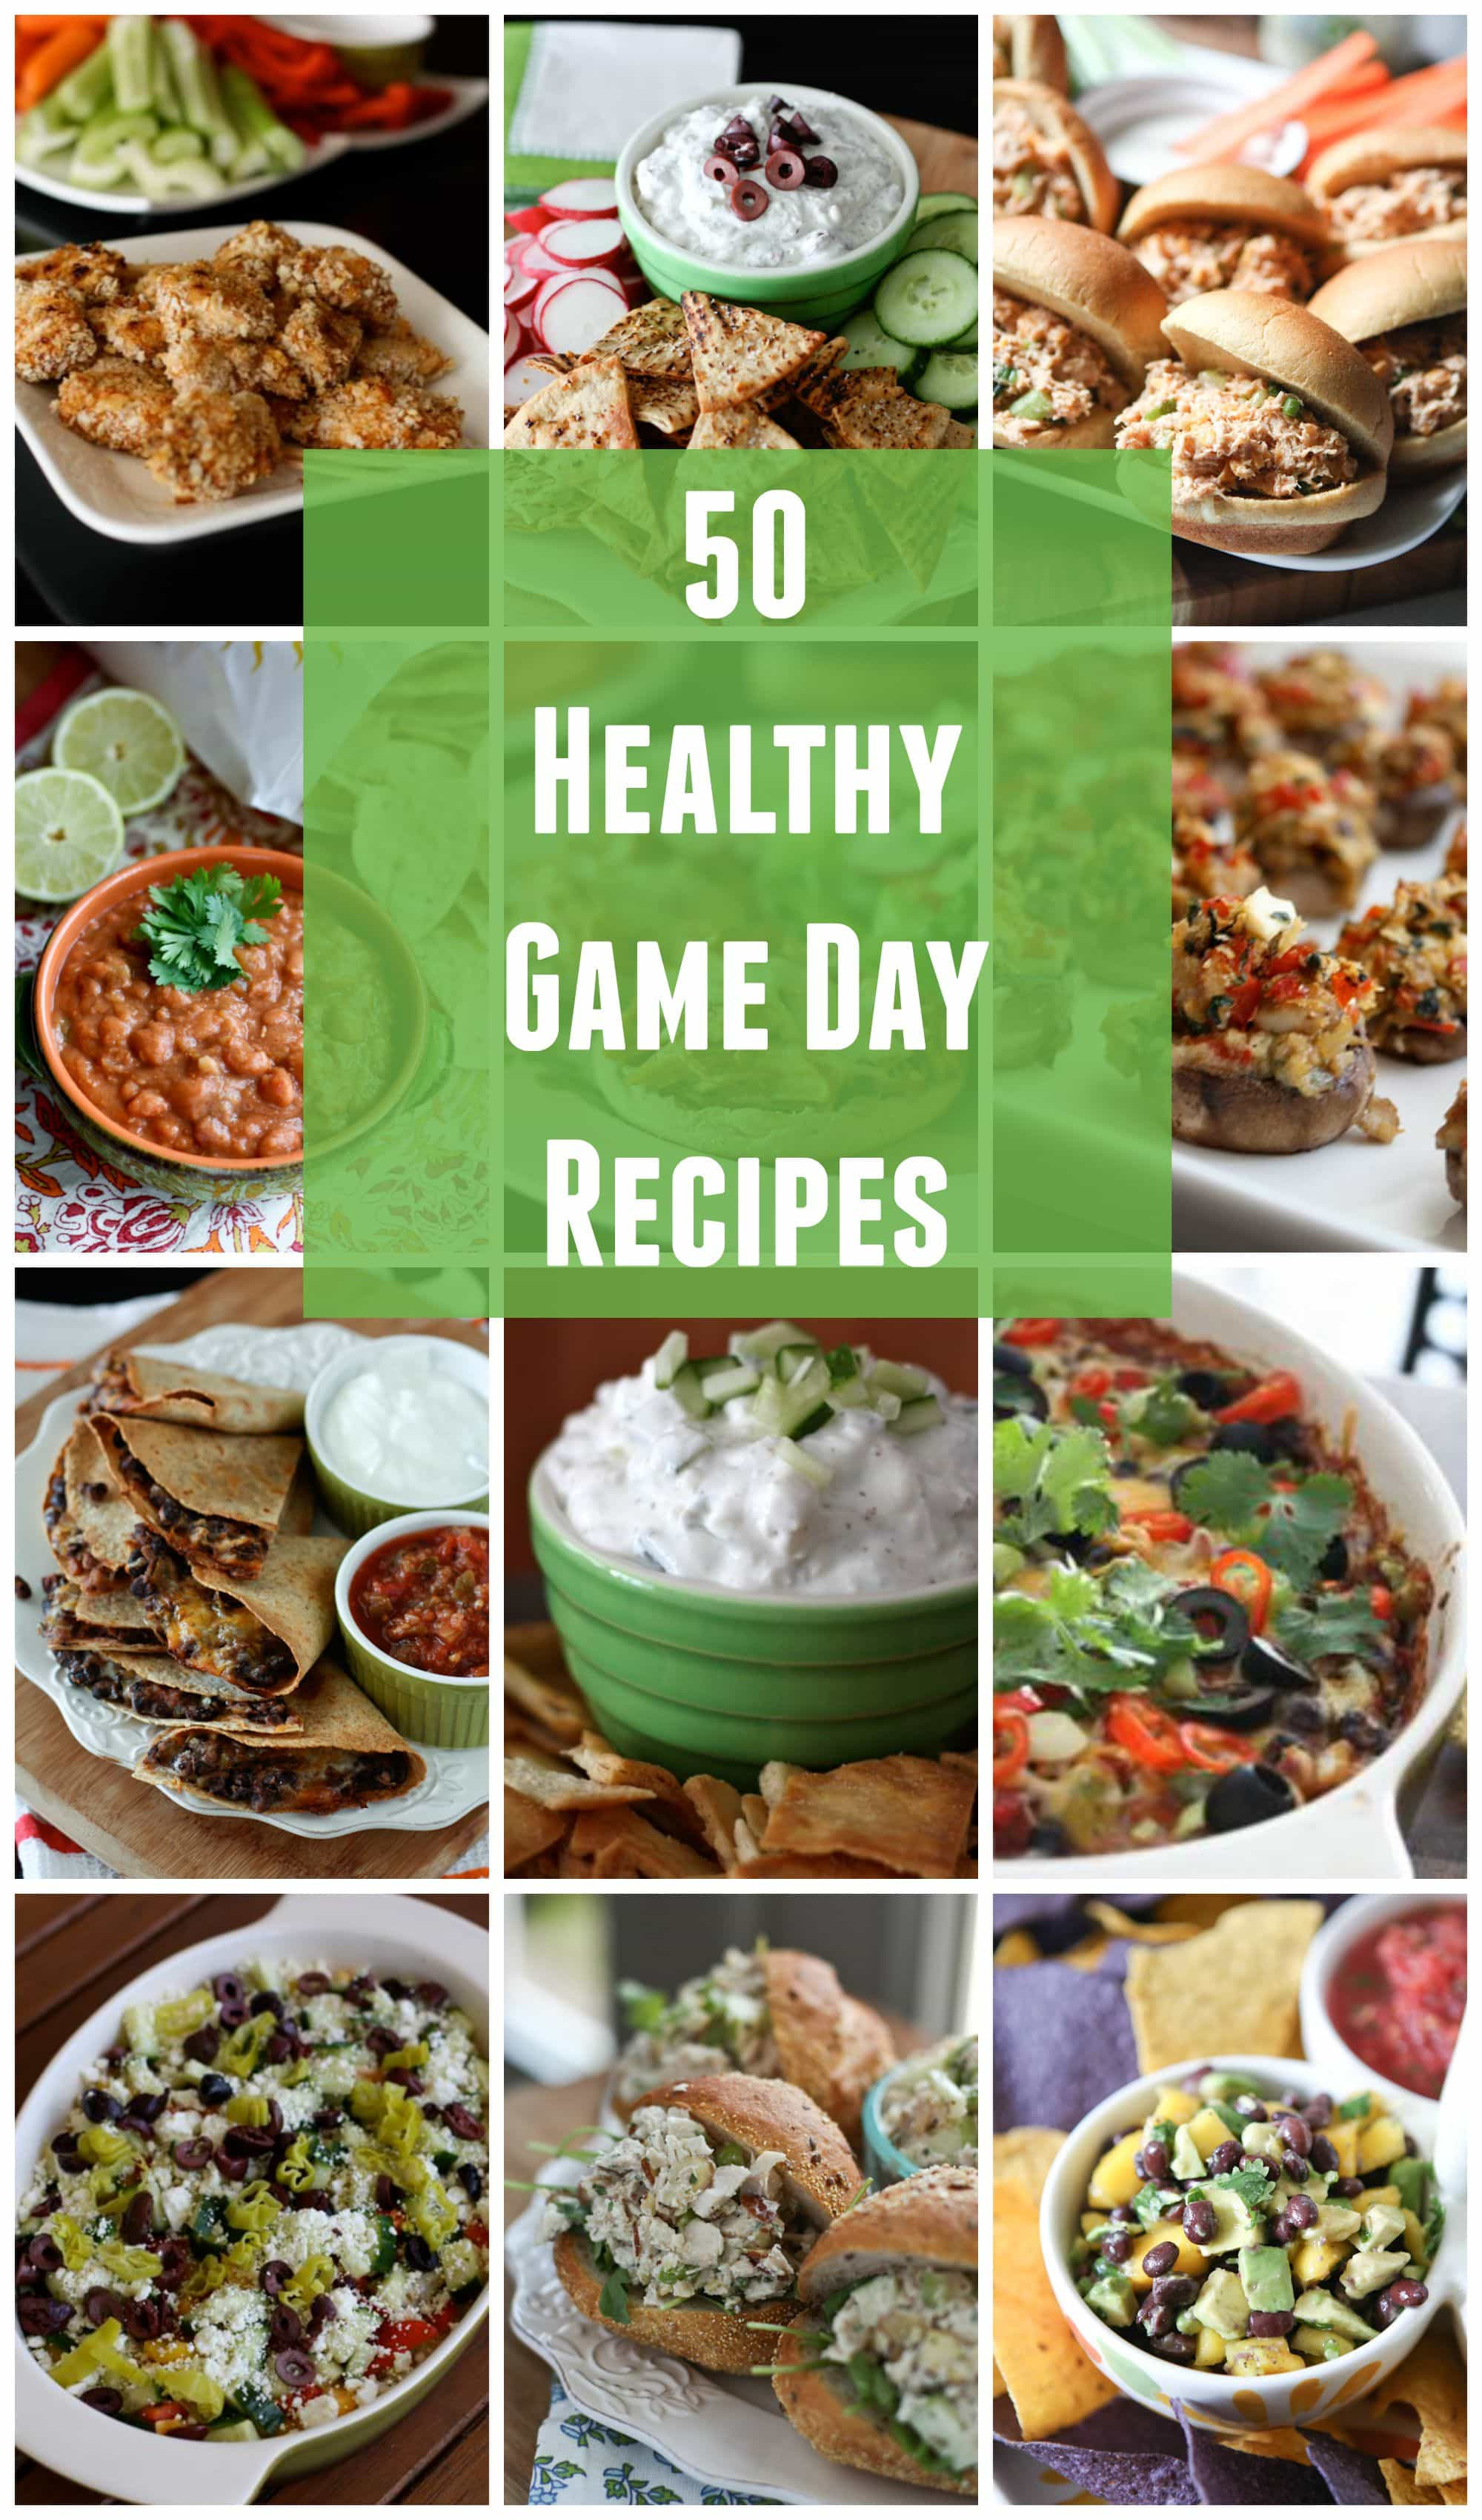 Healthy Football Game Appetizers
 50 Healthy Game Day Recipes